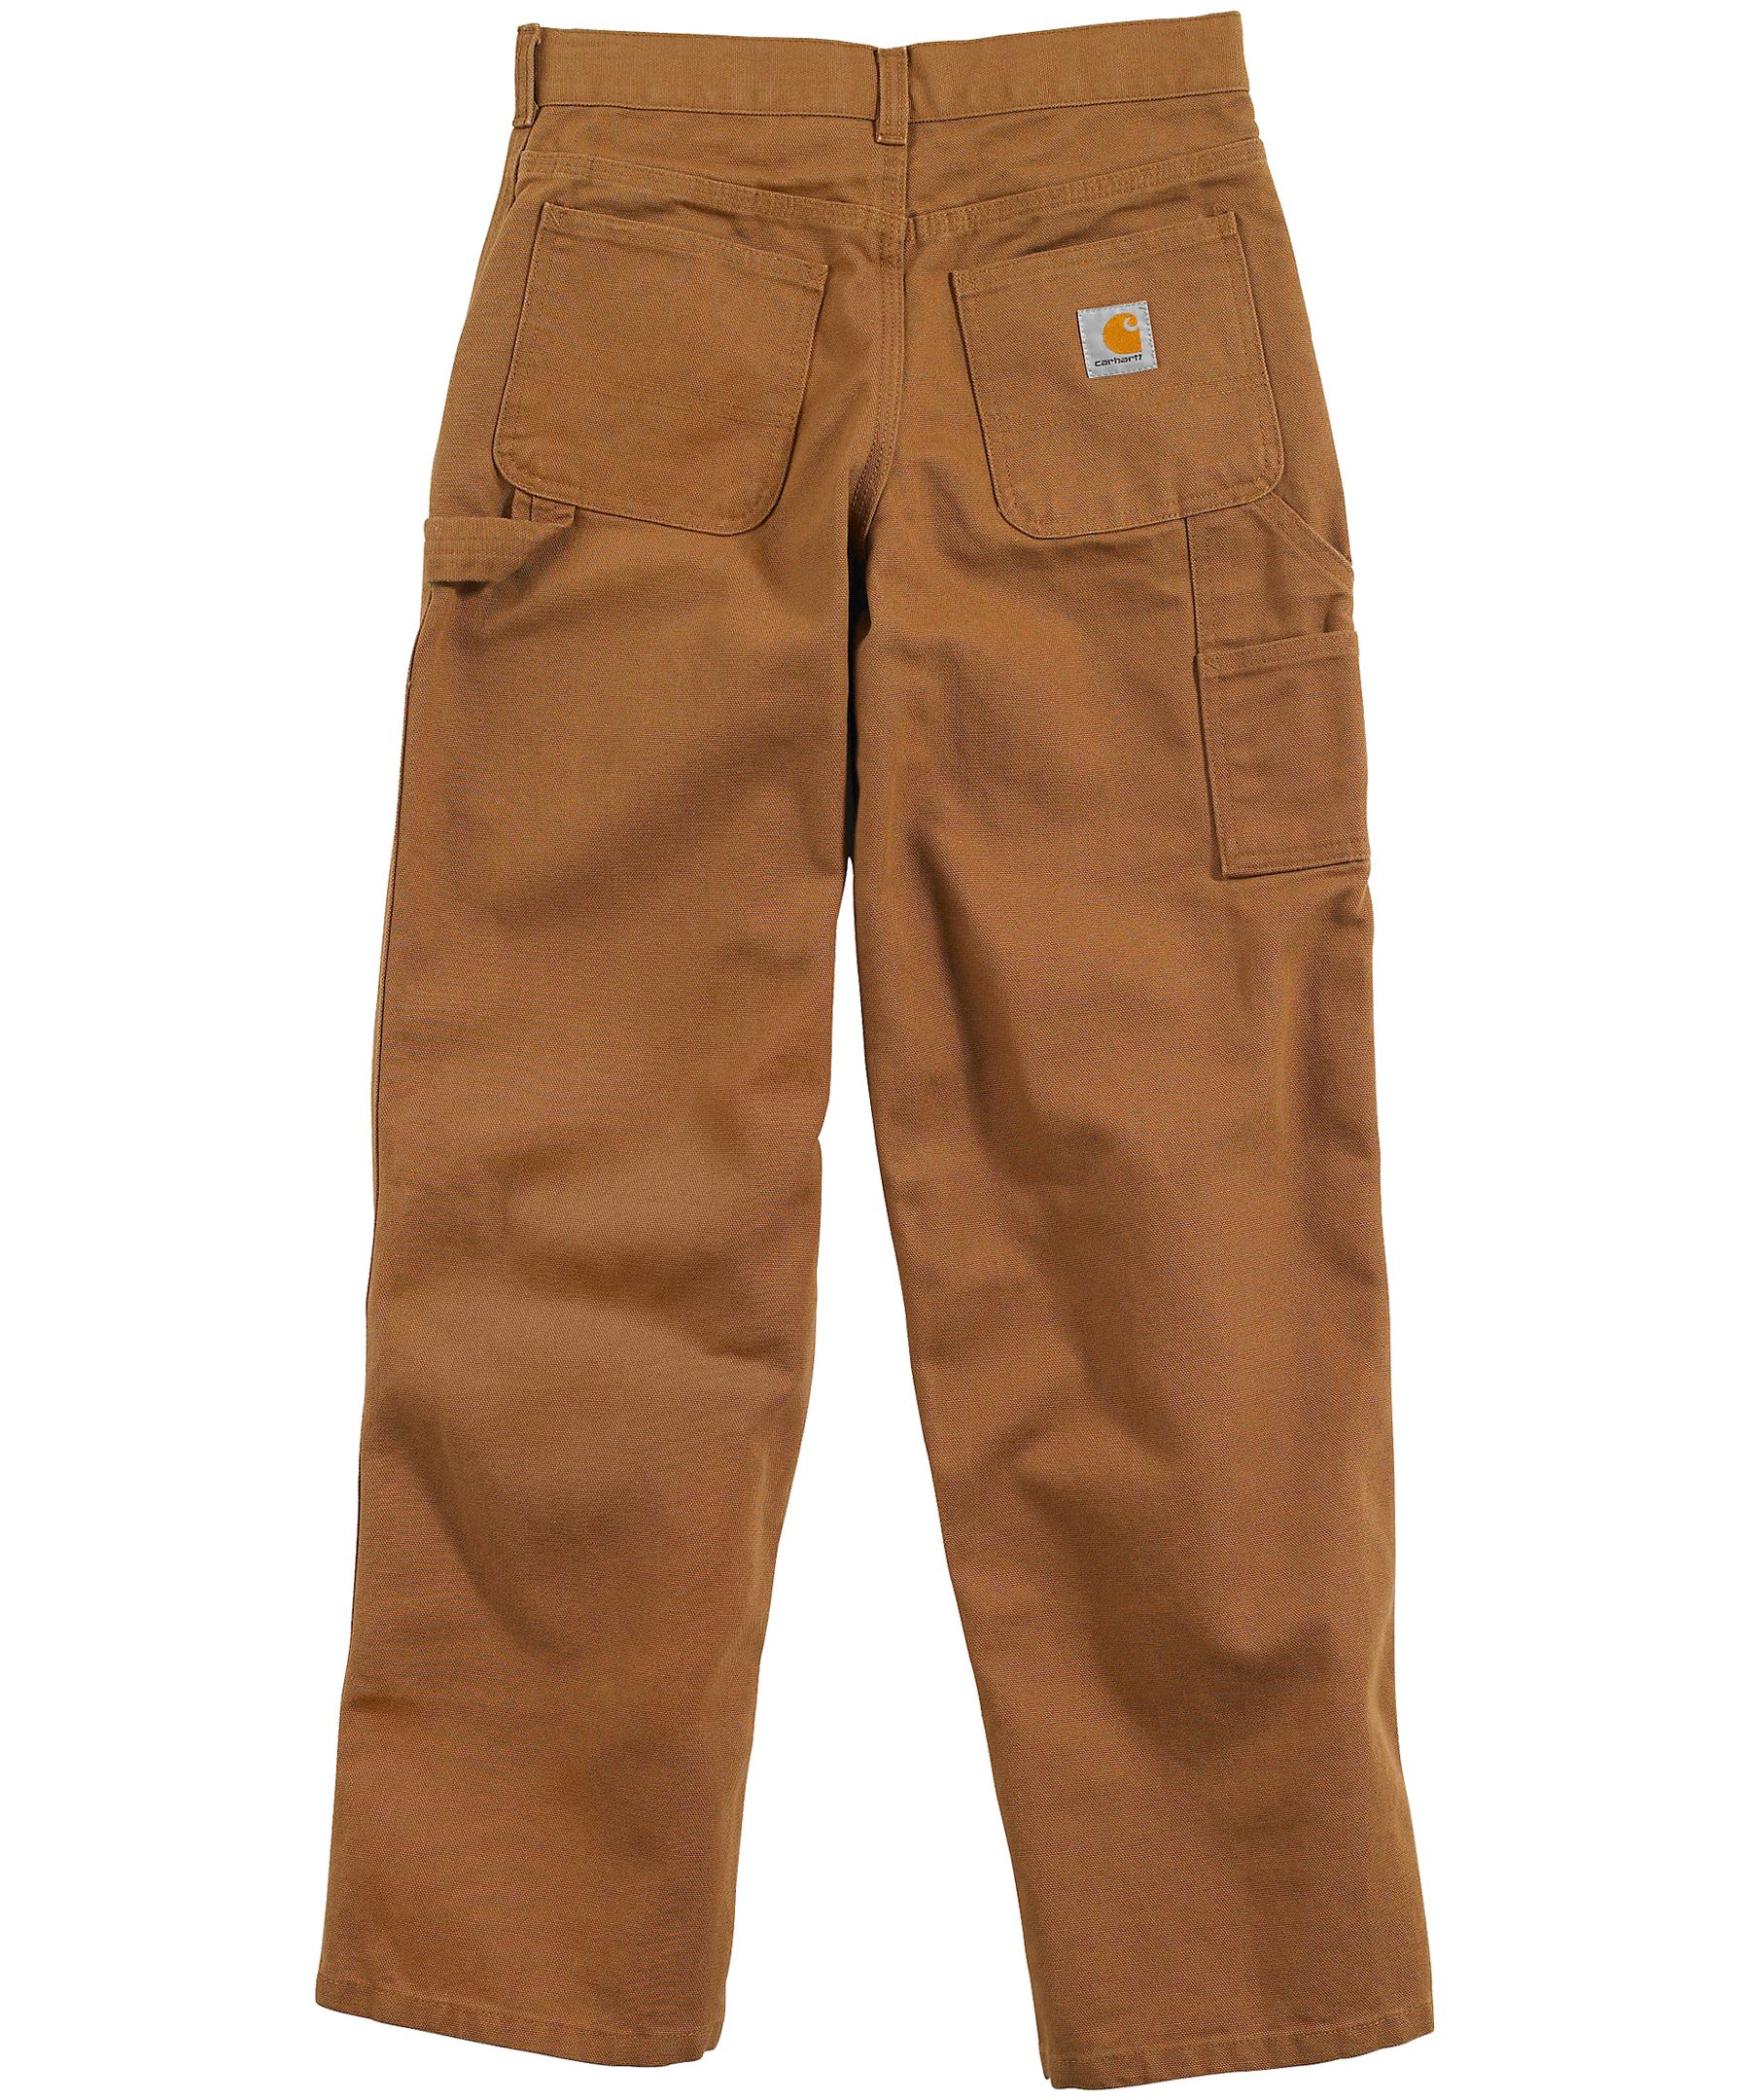 https://media-www.marks.com/product/marks-work-wearhouse/other-world/childrens-wear/410034690588/carhartt-boys-7-16-years-canvas-loose-fit-utility-pants-4b98422a-d765-4c7f-bc69-284f039fd657-jpgrendition.jpg?imdensity=1&imwidth=1244&impolicy=mZoom